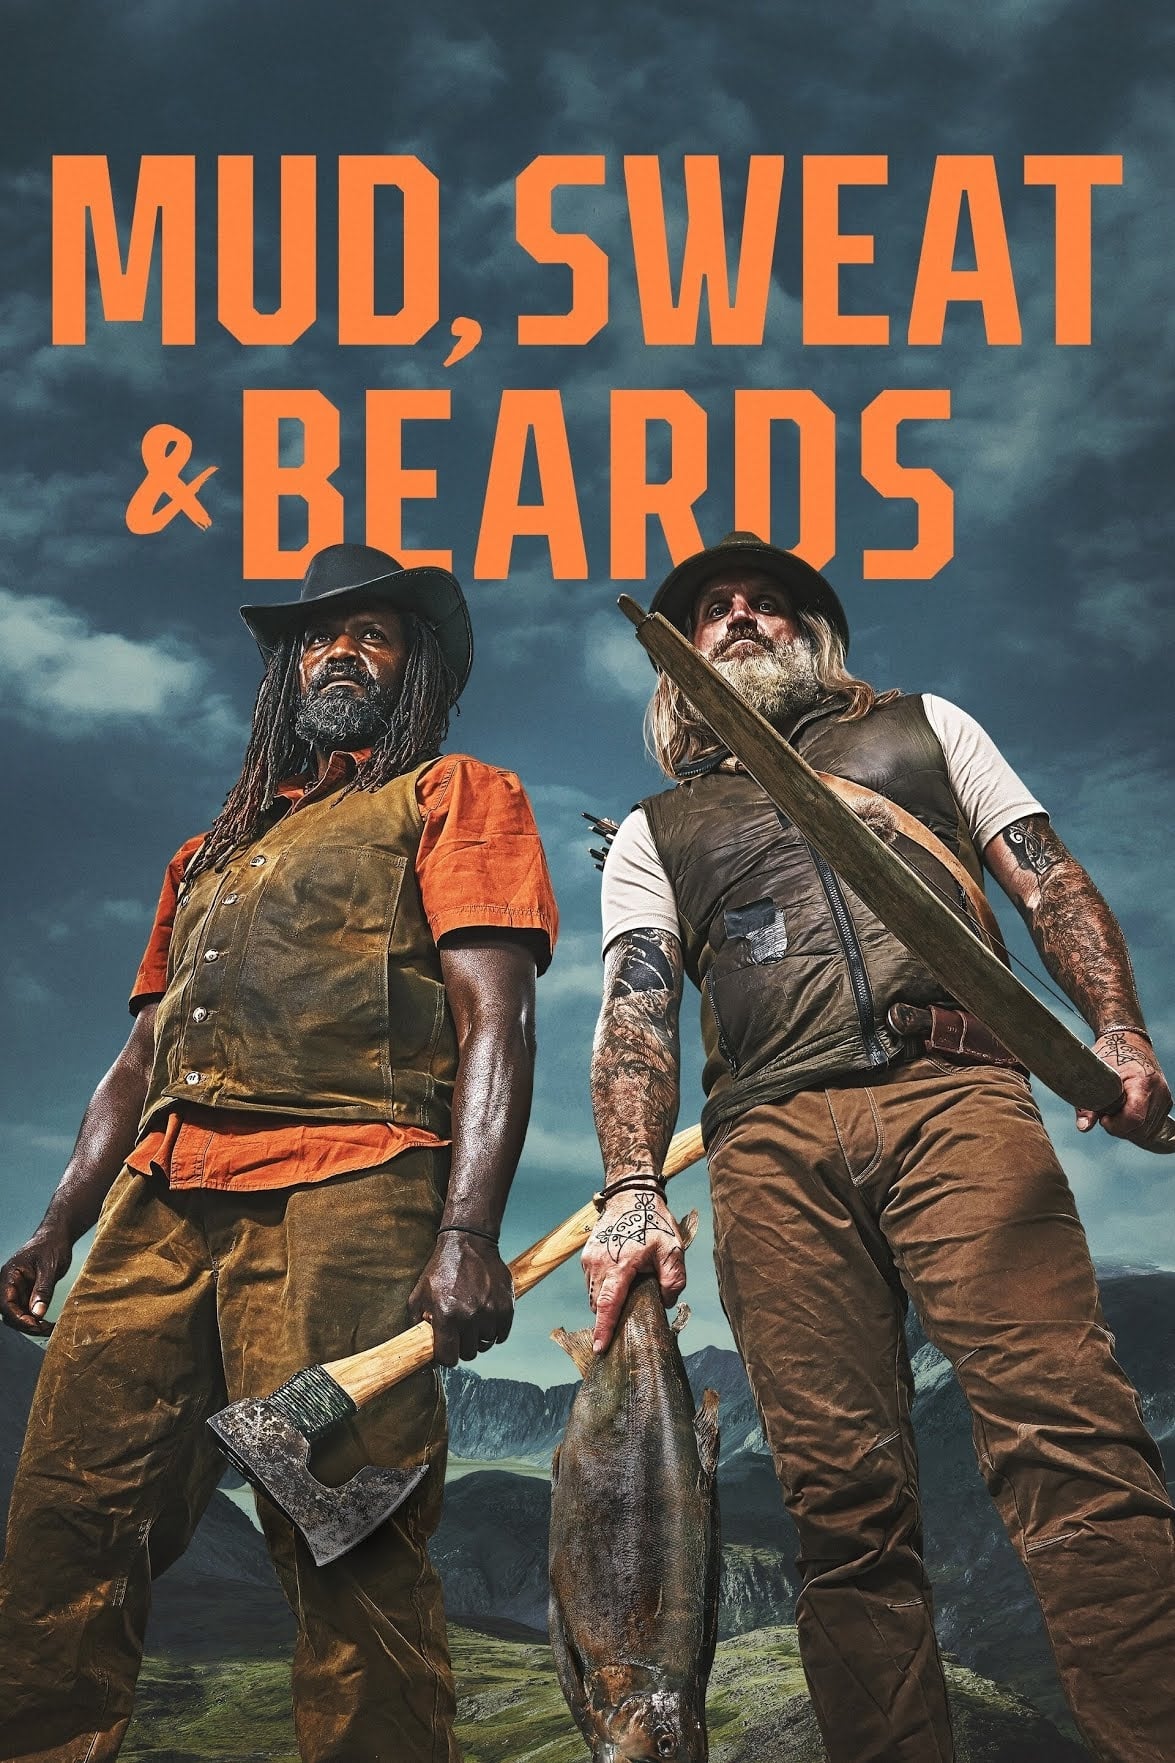 Mud, Sweat and Beards TV Shows About Wilderness